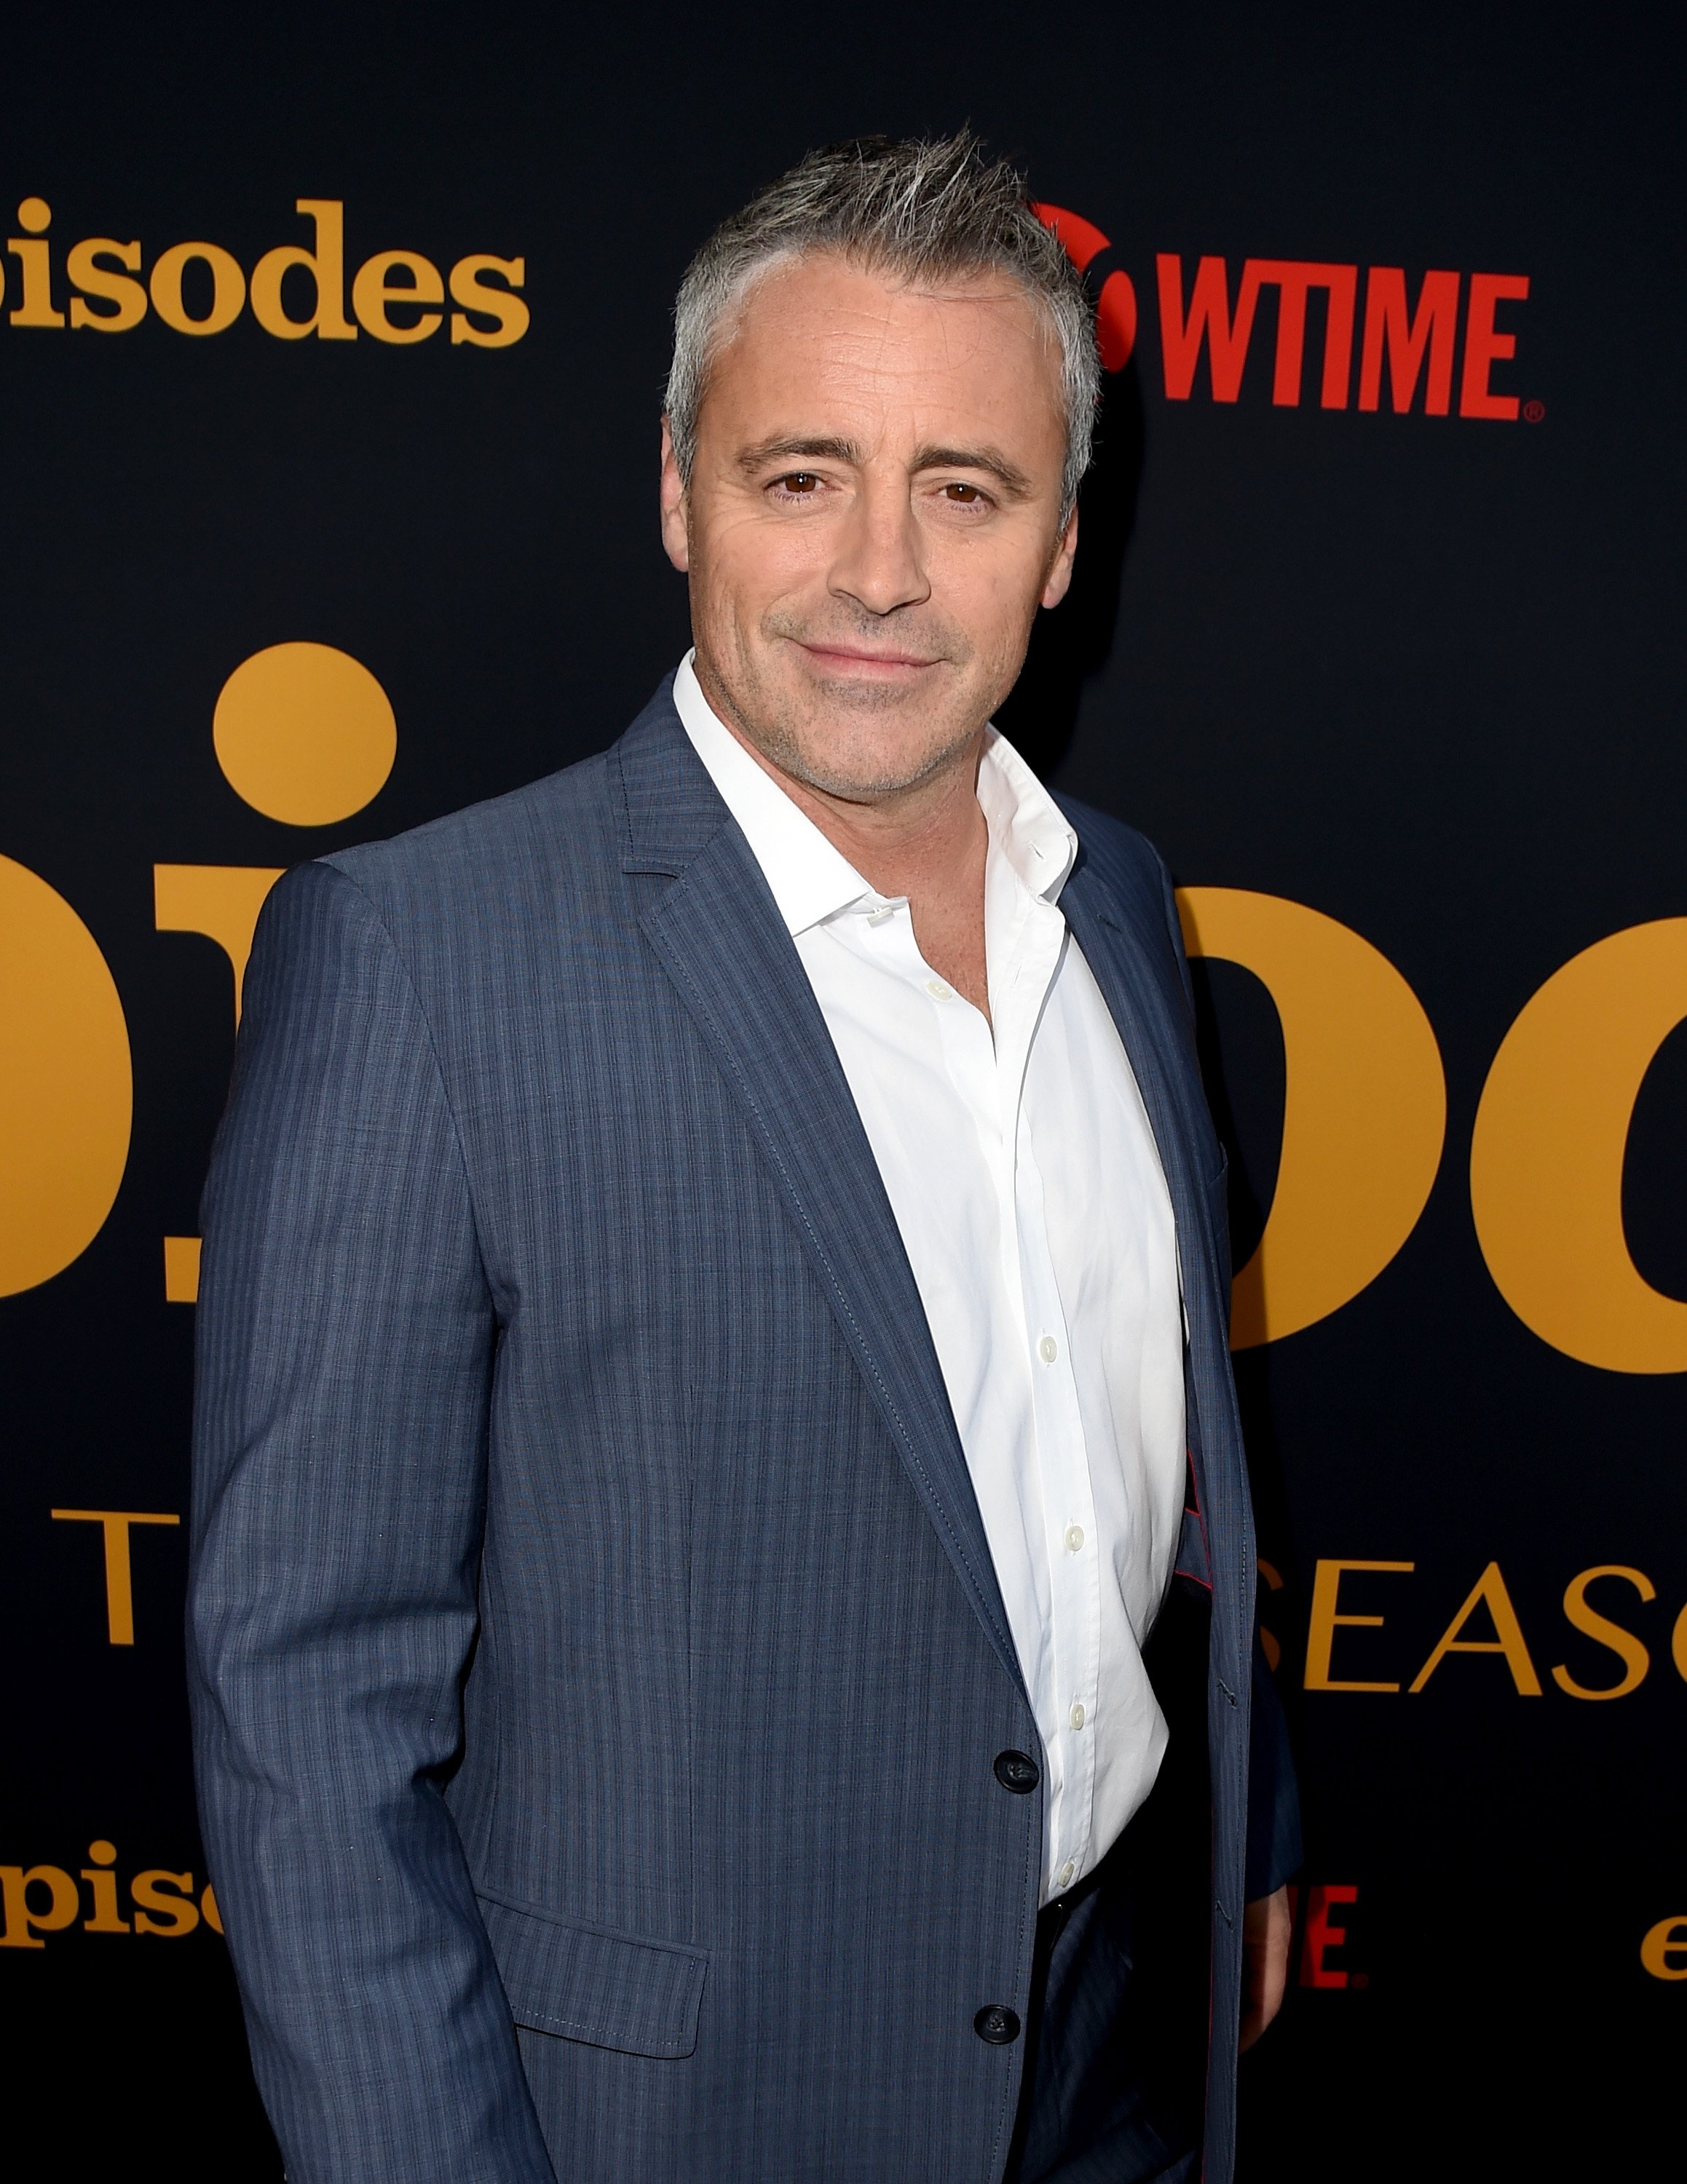  Matt LeBlanc arrives at a party for "Episodes" on August 15, 2017, in Los Angeles, California. | Source: Getty Images.